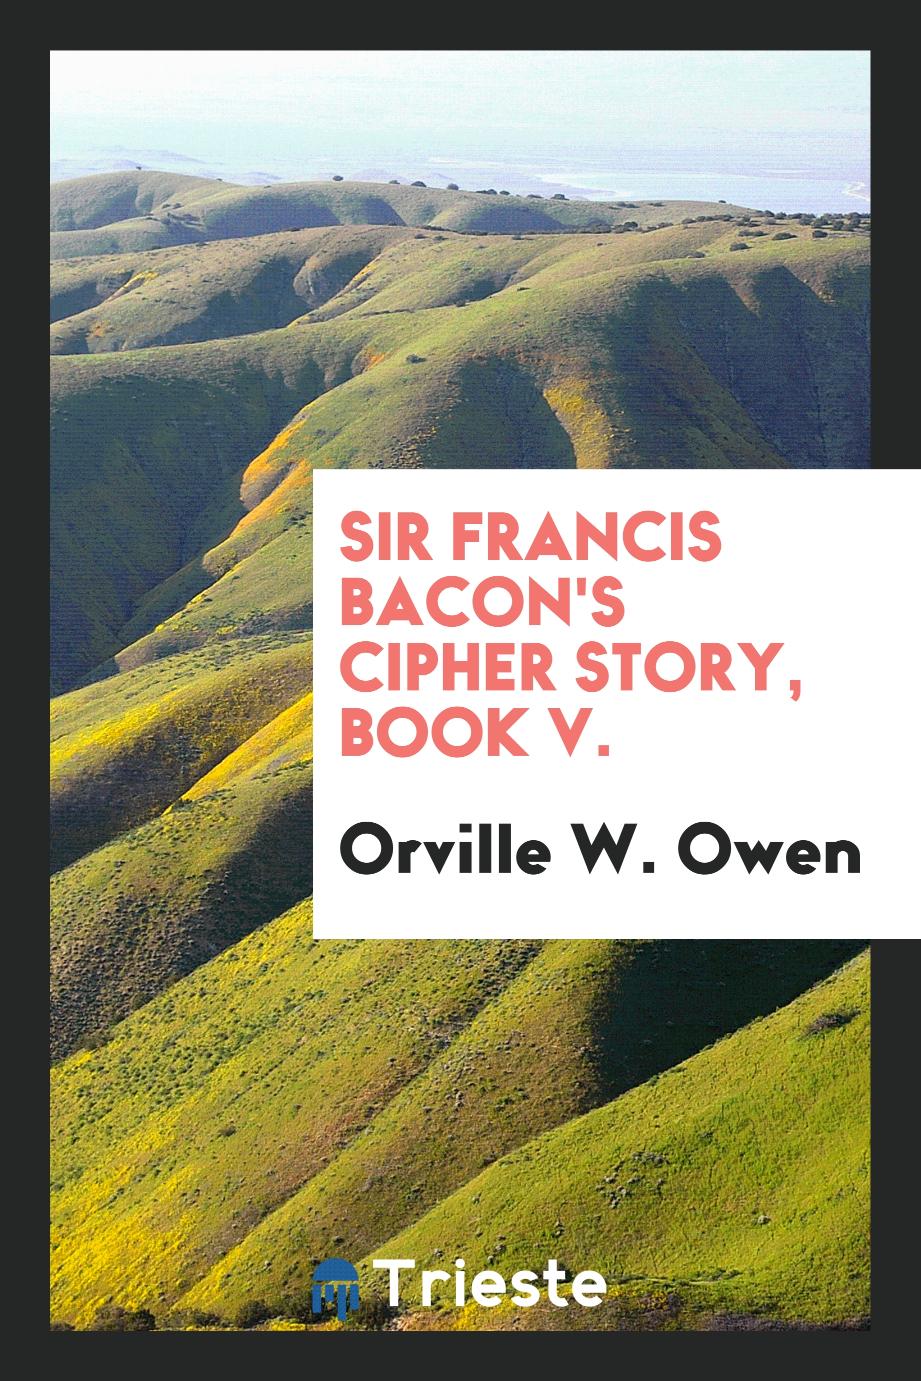 Sir Francis Bacon's cipher story, Book V.